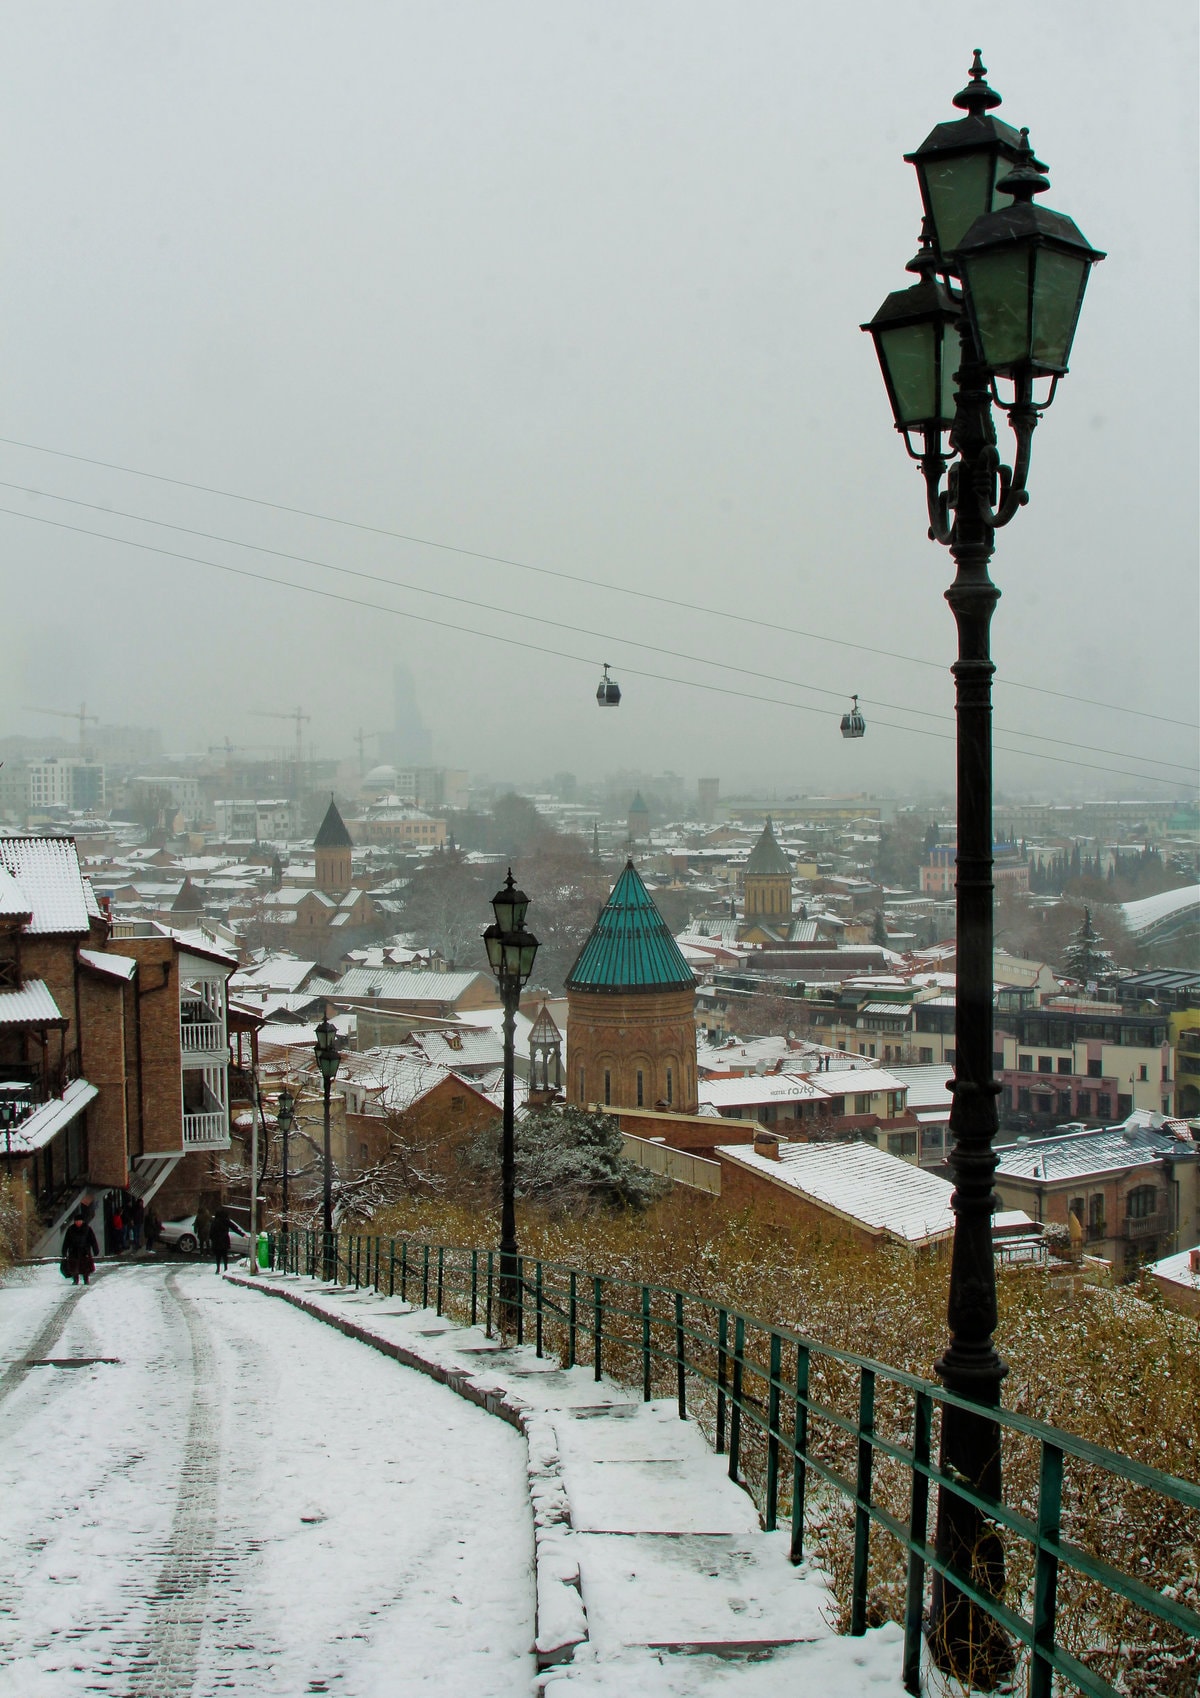 A view of Tbilisi Old Town in winter